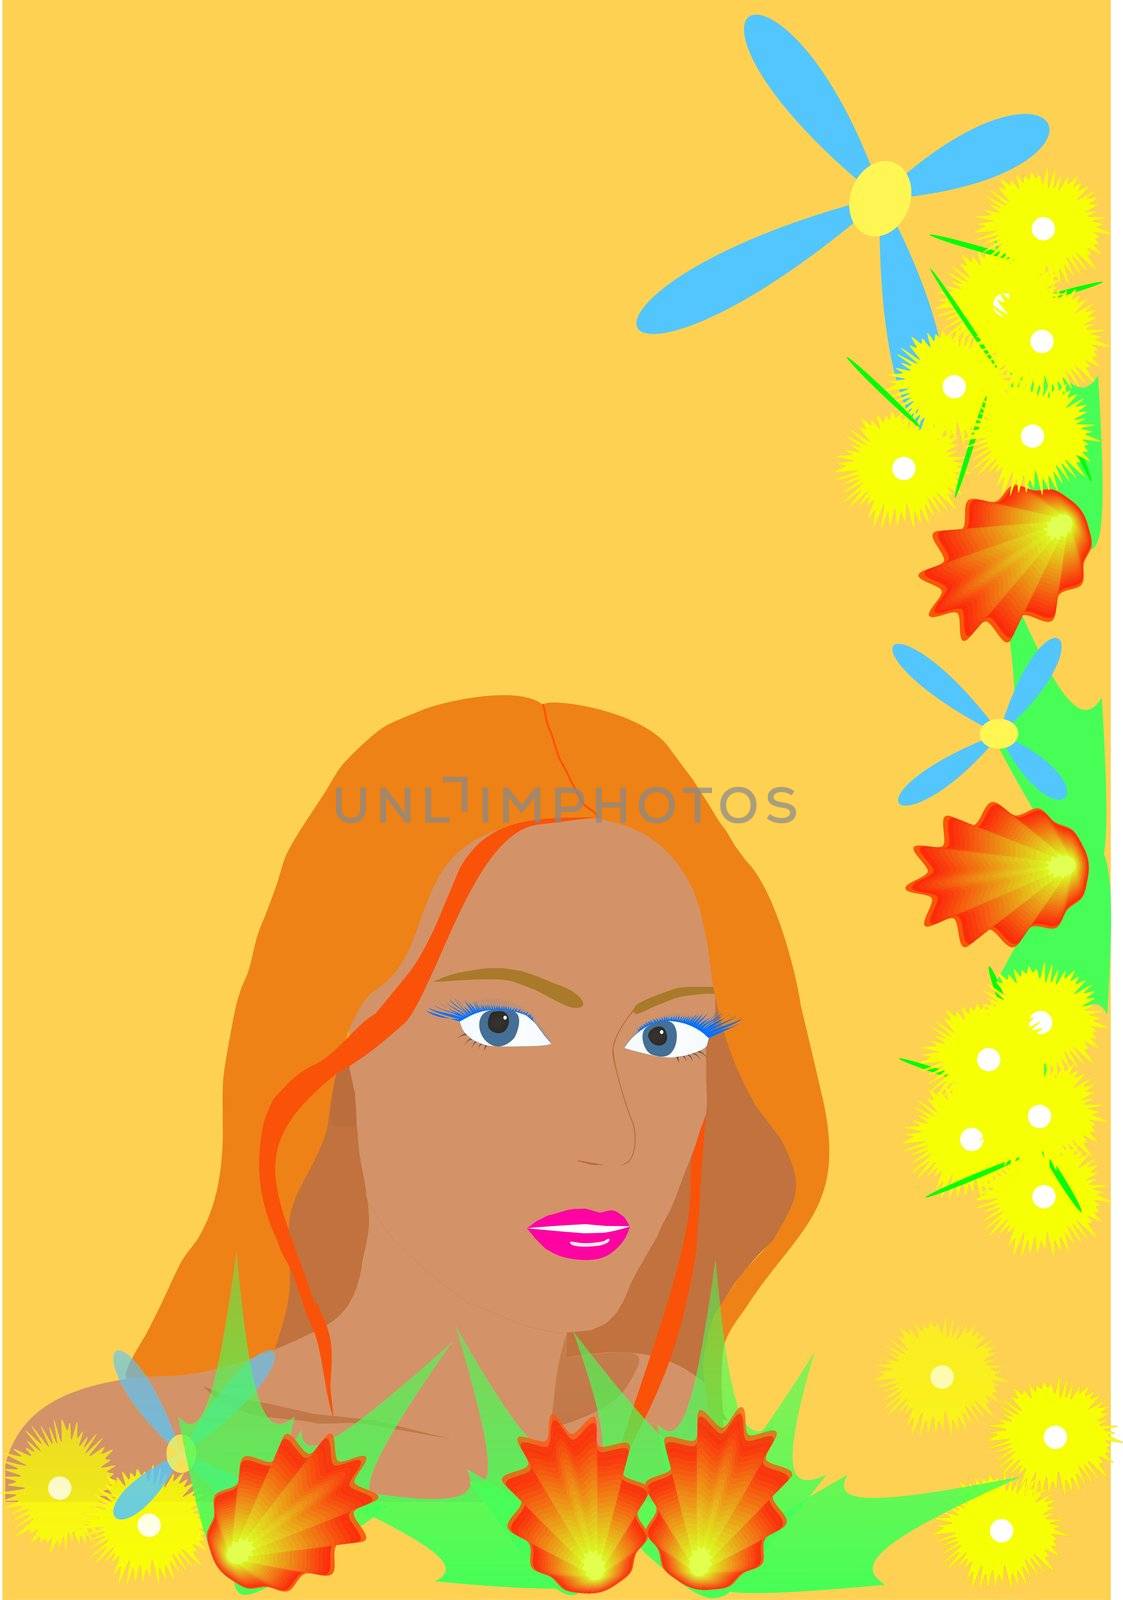 The young red-haired girl on on a yellow background with bright years colors